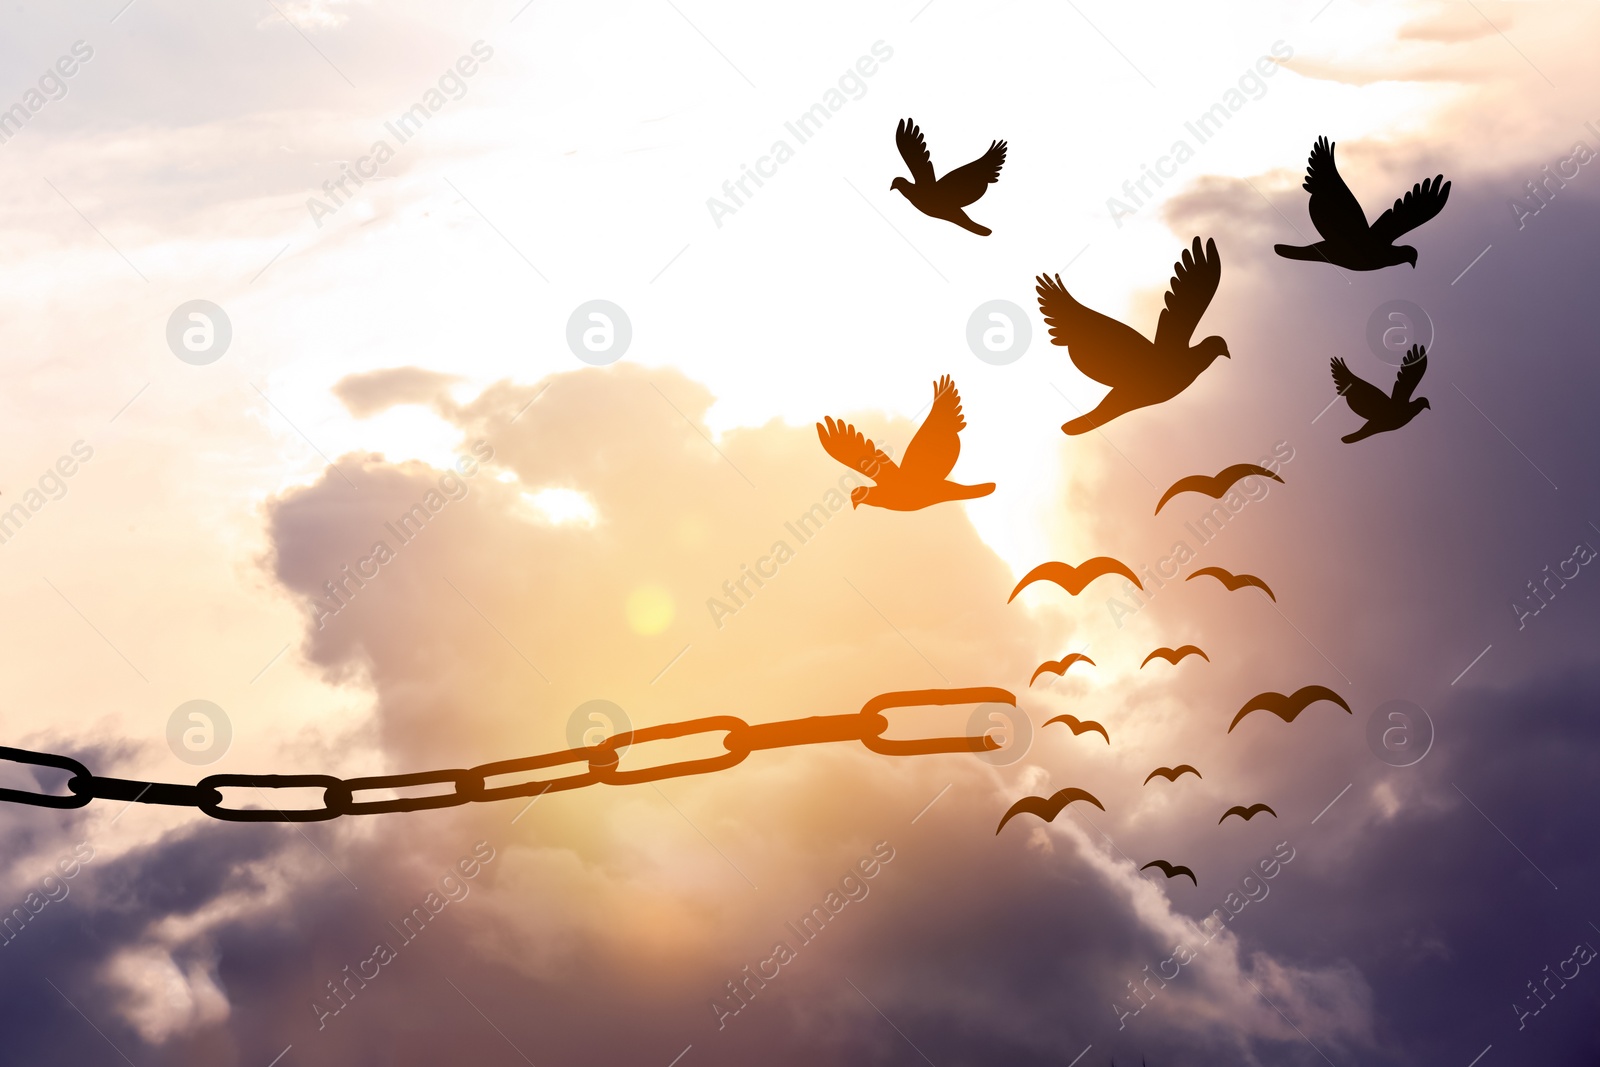 Image of Freedom concept. Silhouettes of broken chain and birds flying in sky